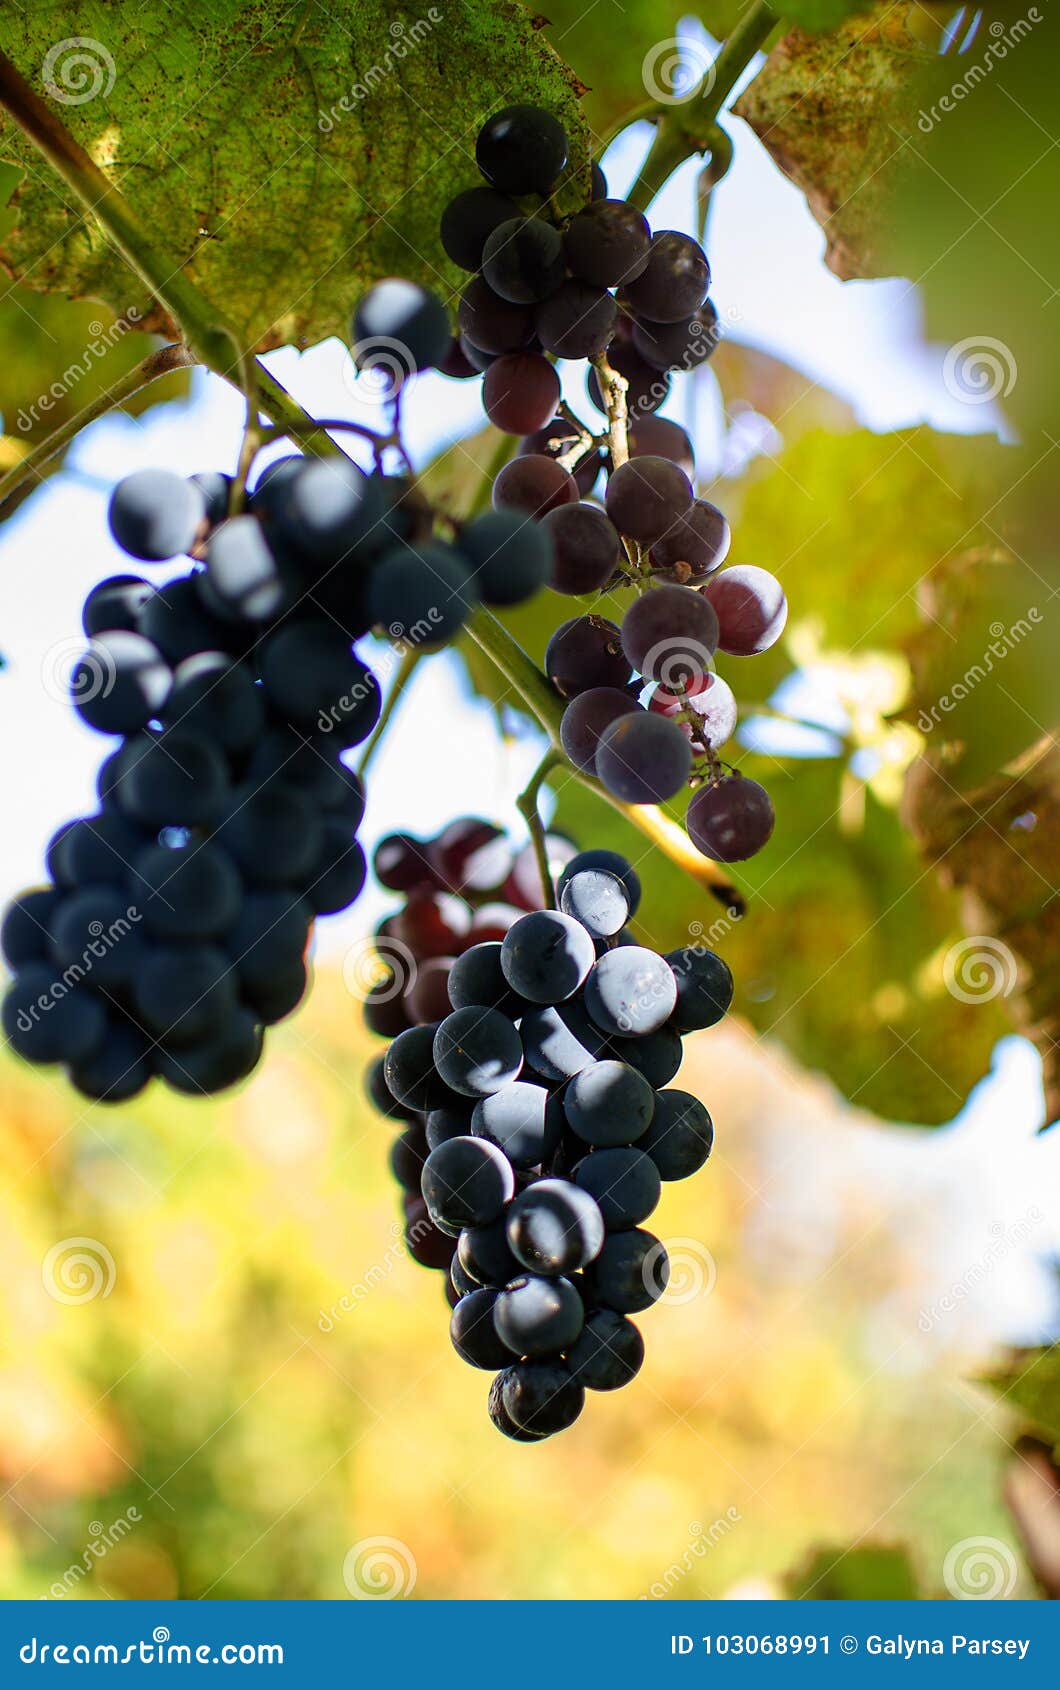 The Grapevine Grows in the Open Air in the Autumn Stock Image Image